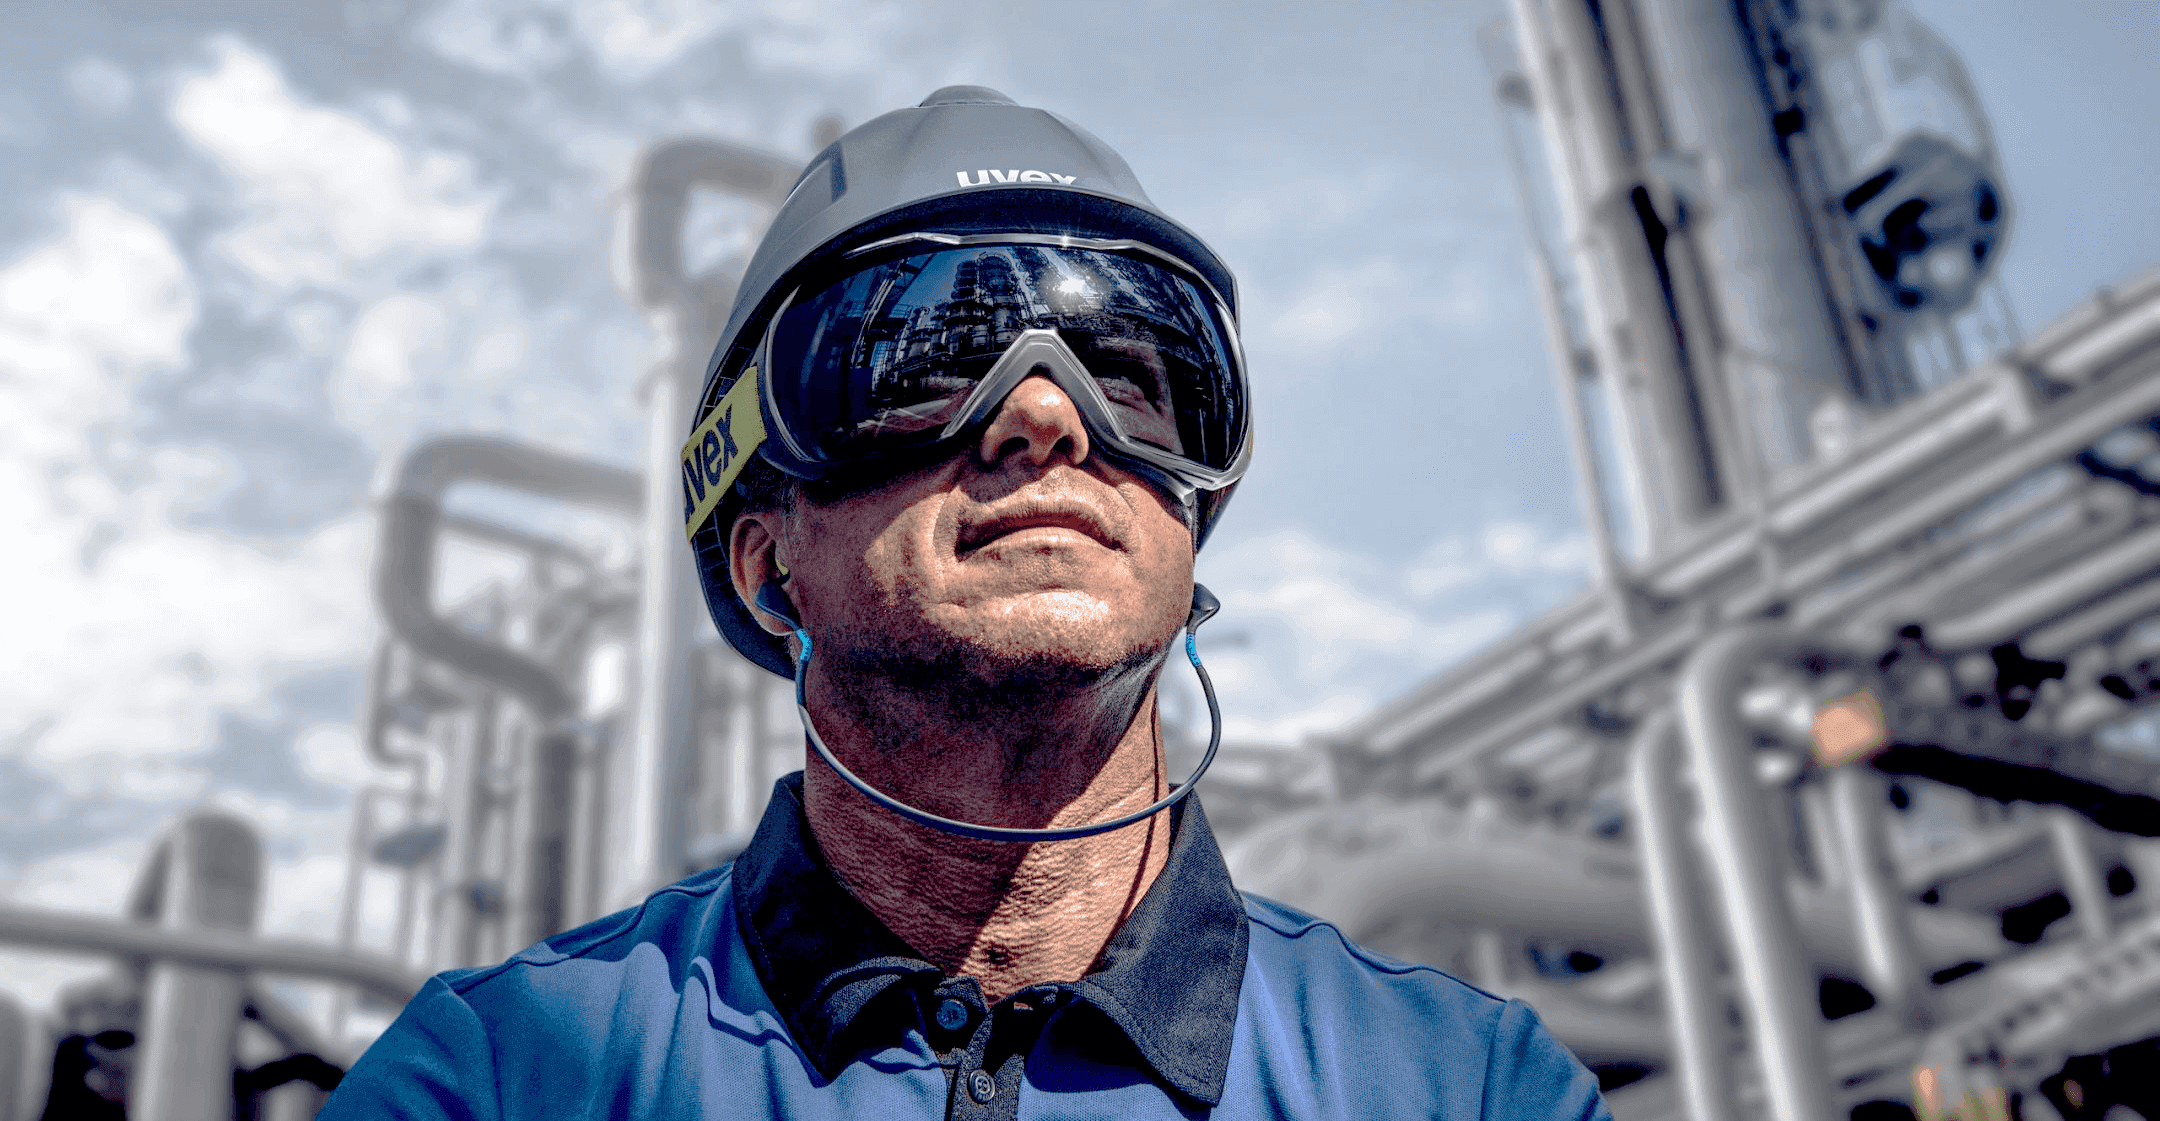 Choosing PPE for summer article cover picture